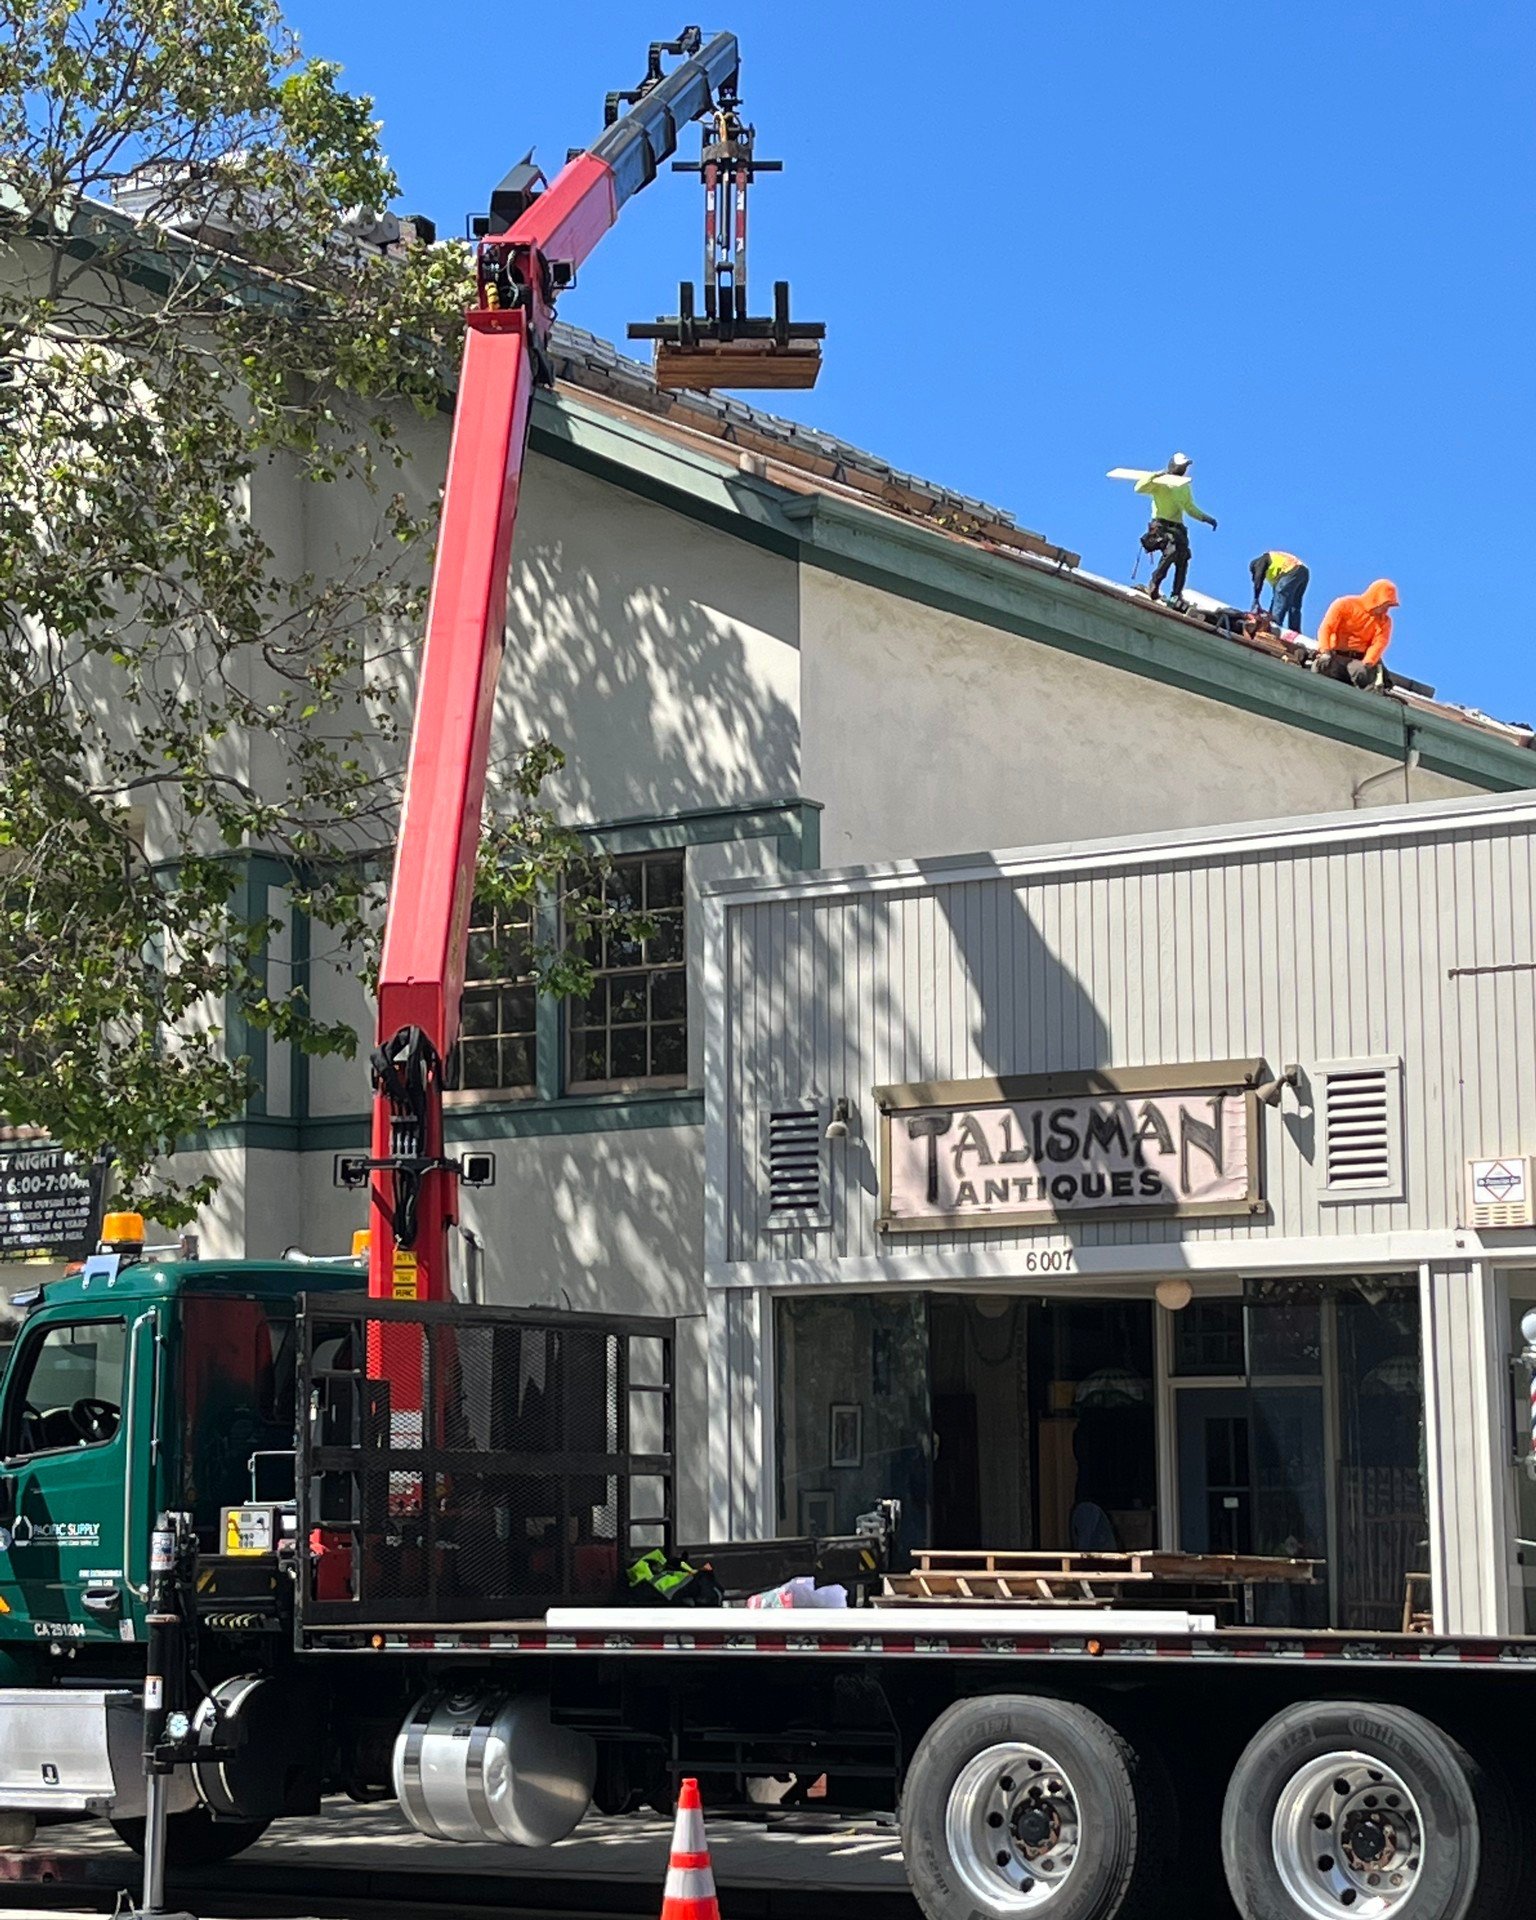 Congratulations to College Avenue Presbyterian Church for progress on installing a new solar panel system on the roof of your historic (100+ year old) building! We're excited to see the progress as it comes together.

Photo by Dann Wilkens offers a r